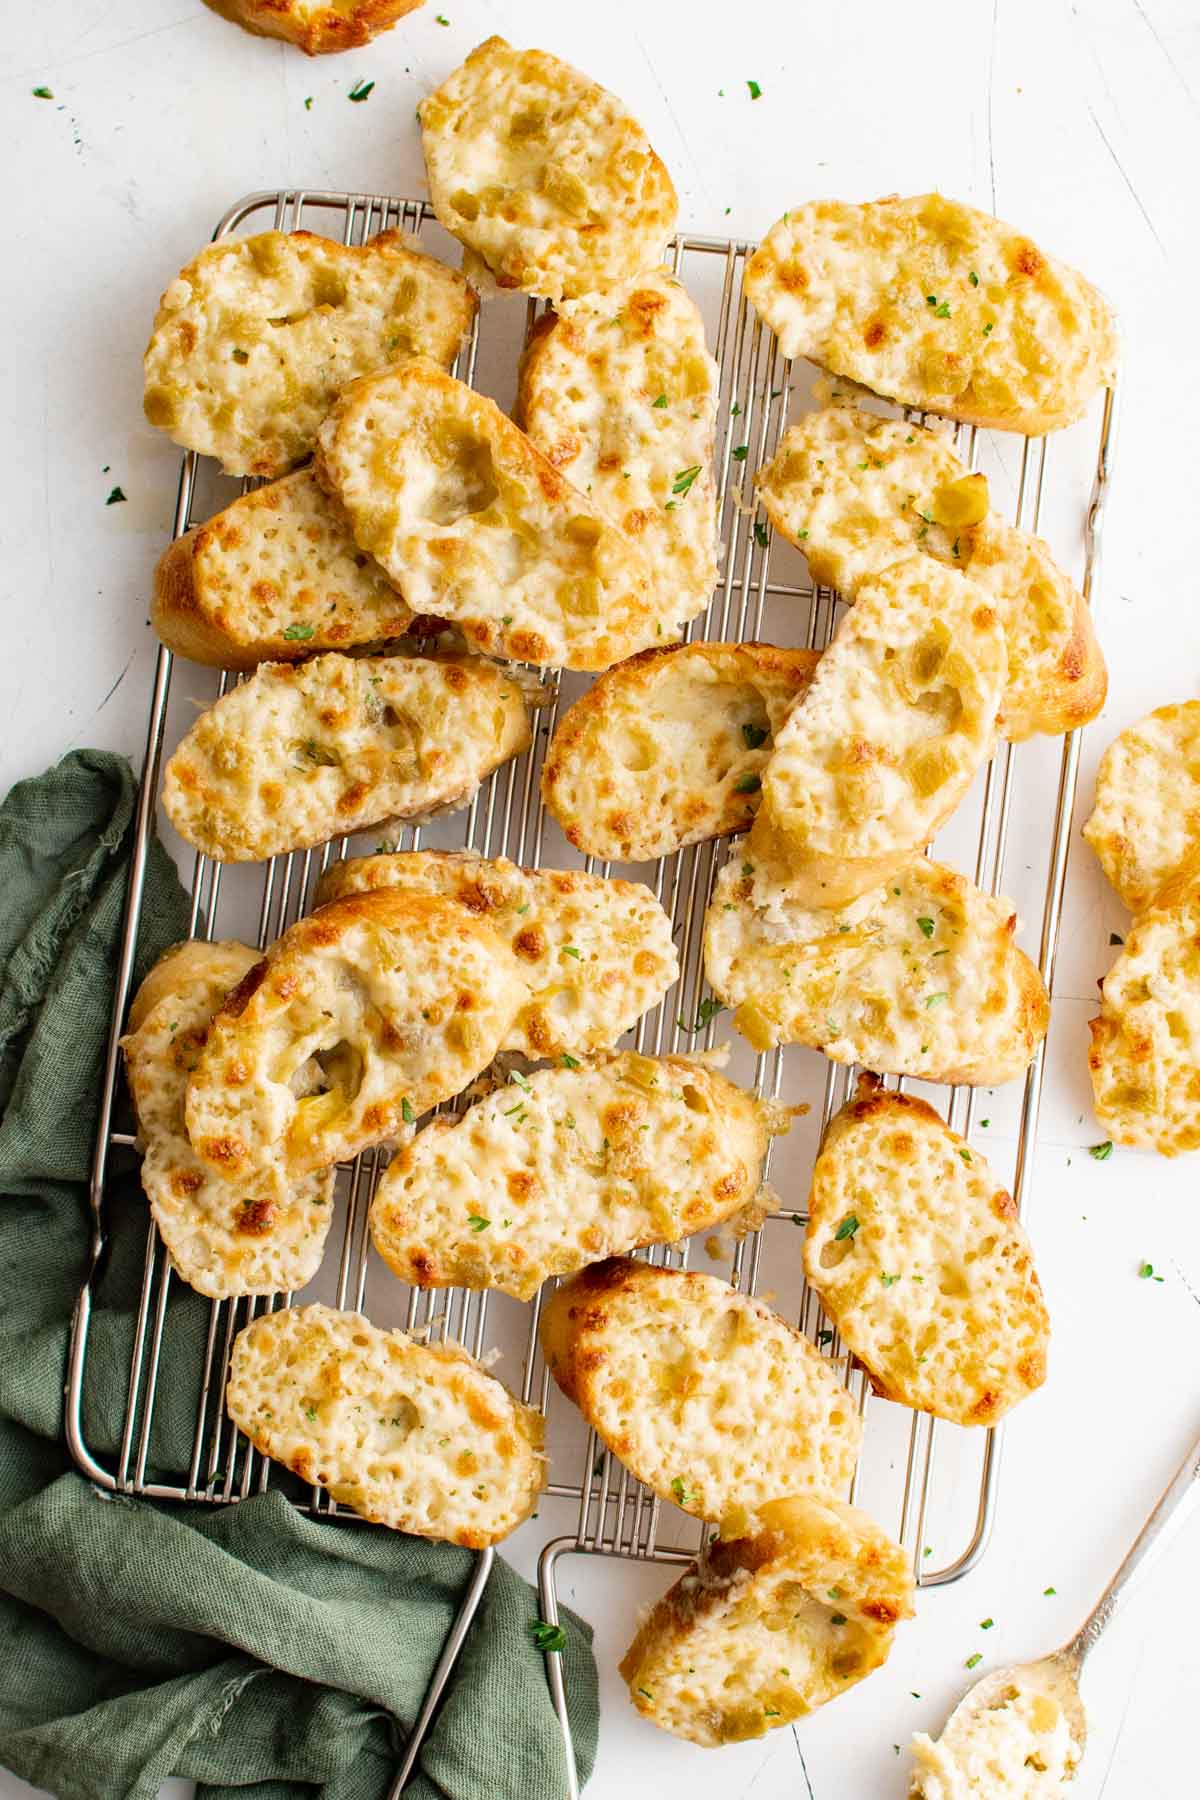 Small pieces of toasted bread with cheese and green chiles.